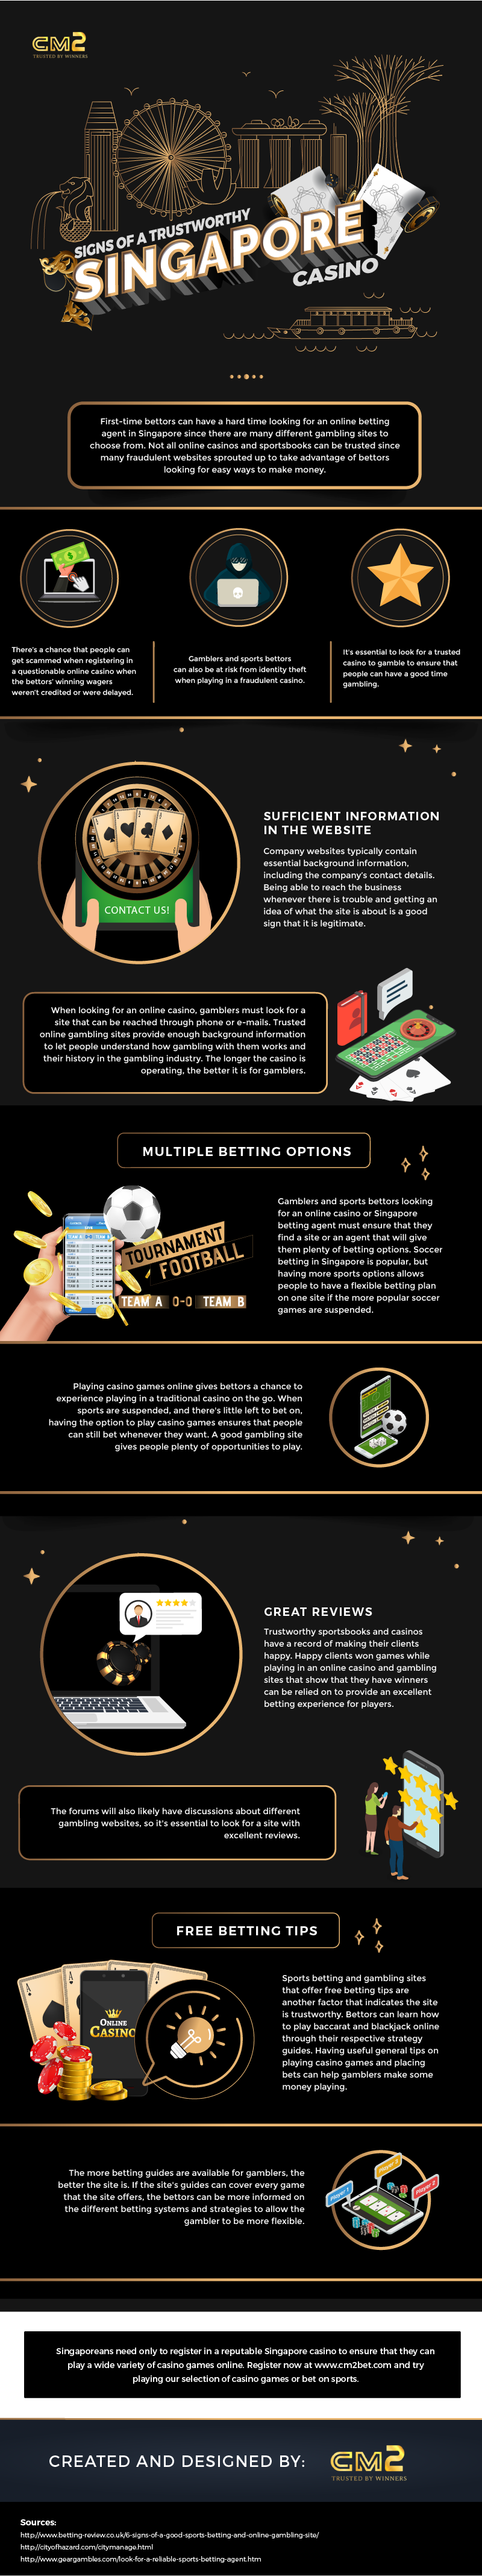 Signs of a Trustworthy Singapore Casino - Infographic